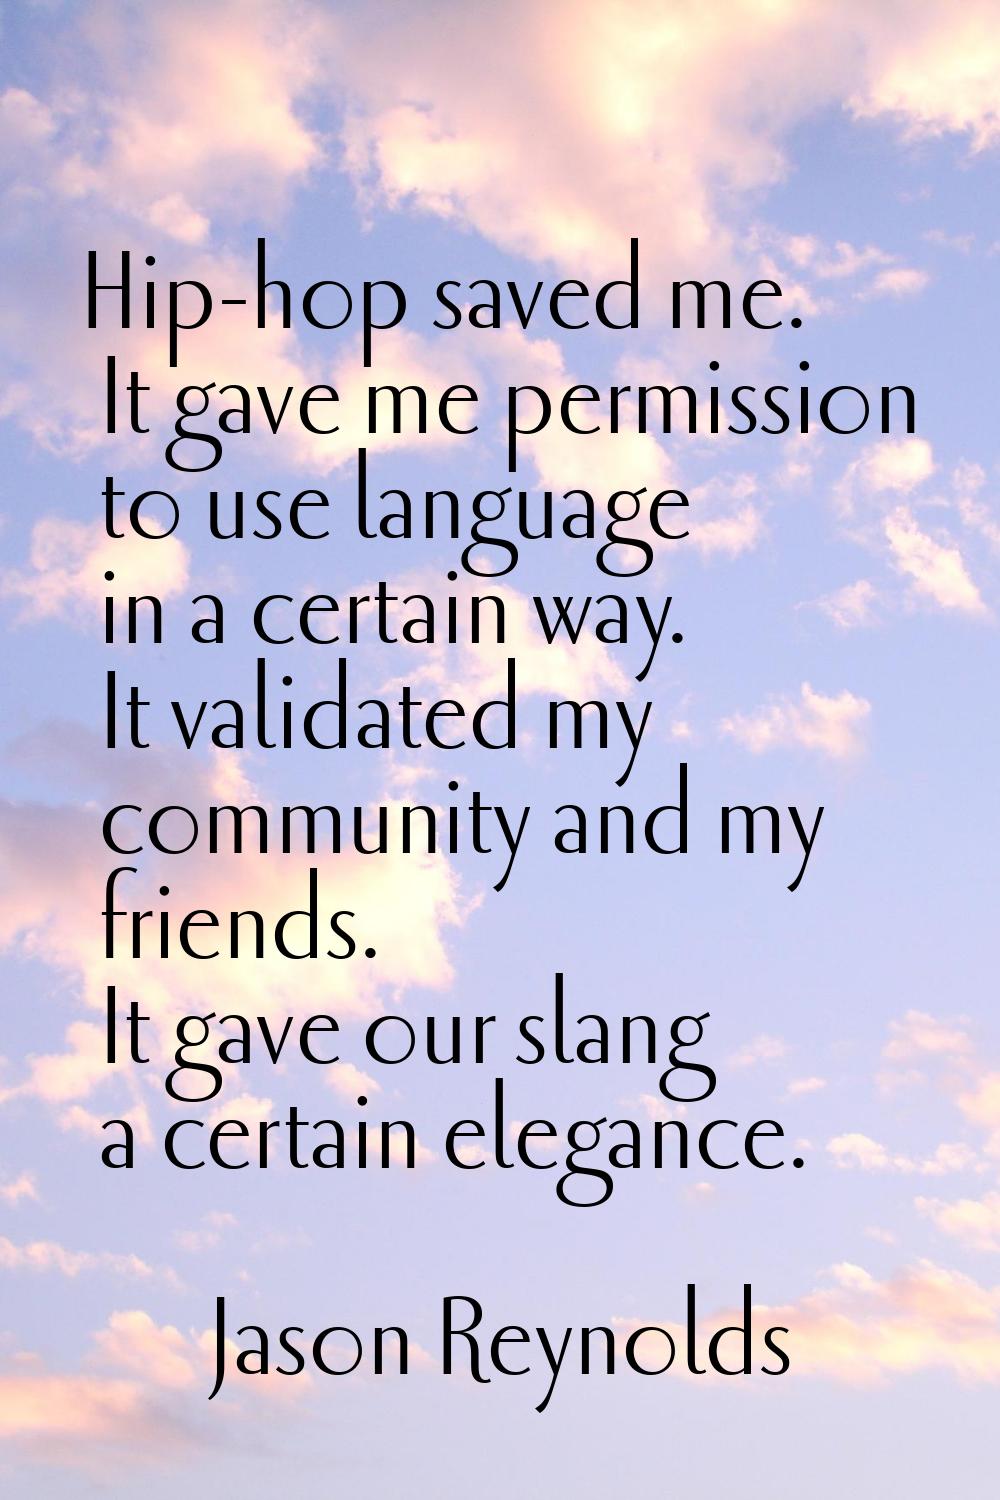 Hip-hop saved me. It gave me permission to use language in a certain way. It validated my community